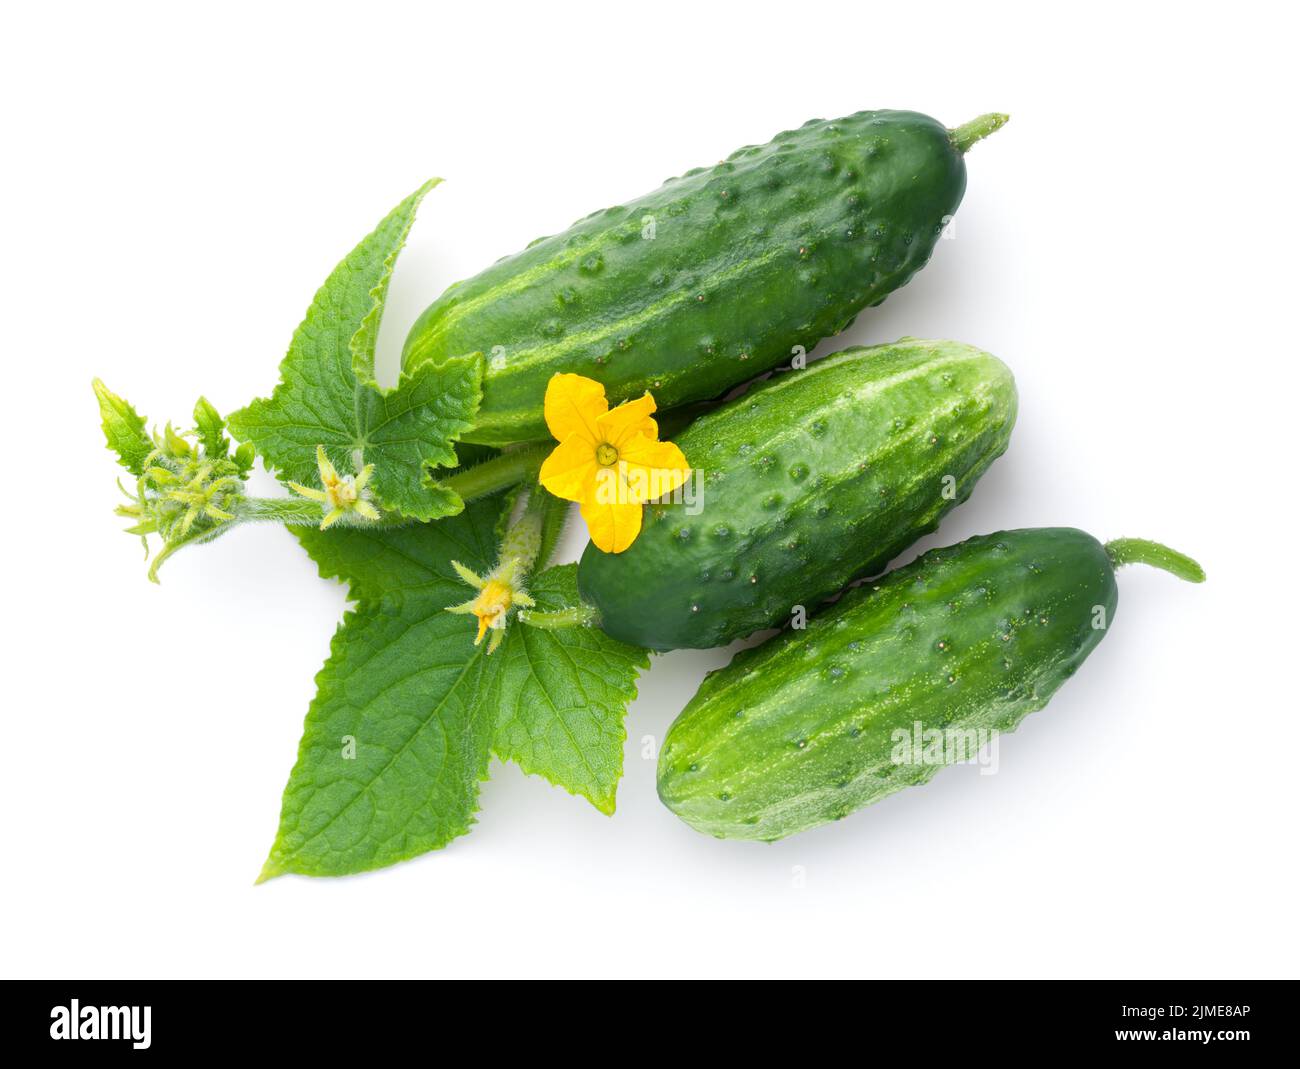 Cucumber With Leaf And Flower White Isolated Stock Photo